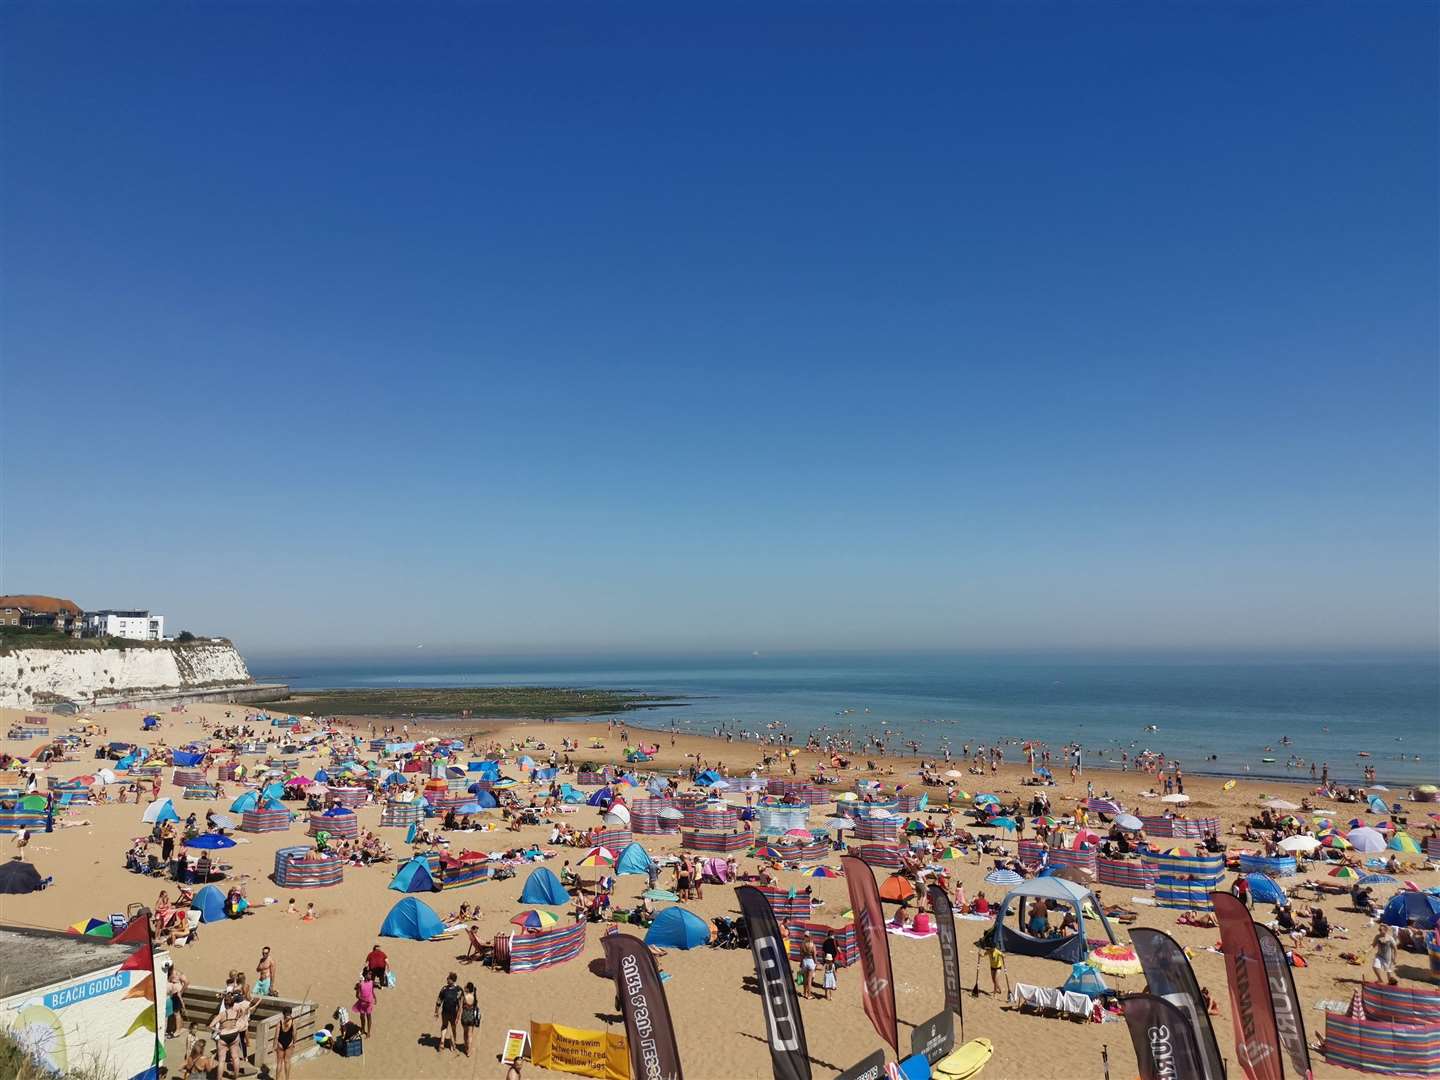 Joss Bay was packed yesterday as temperatures soared over 30°C